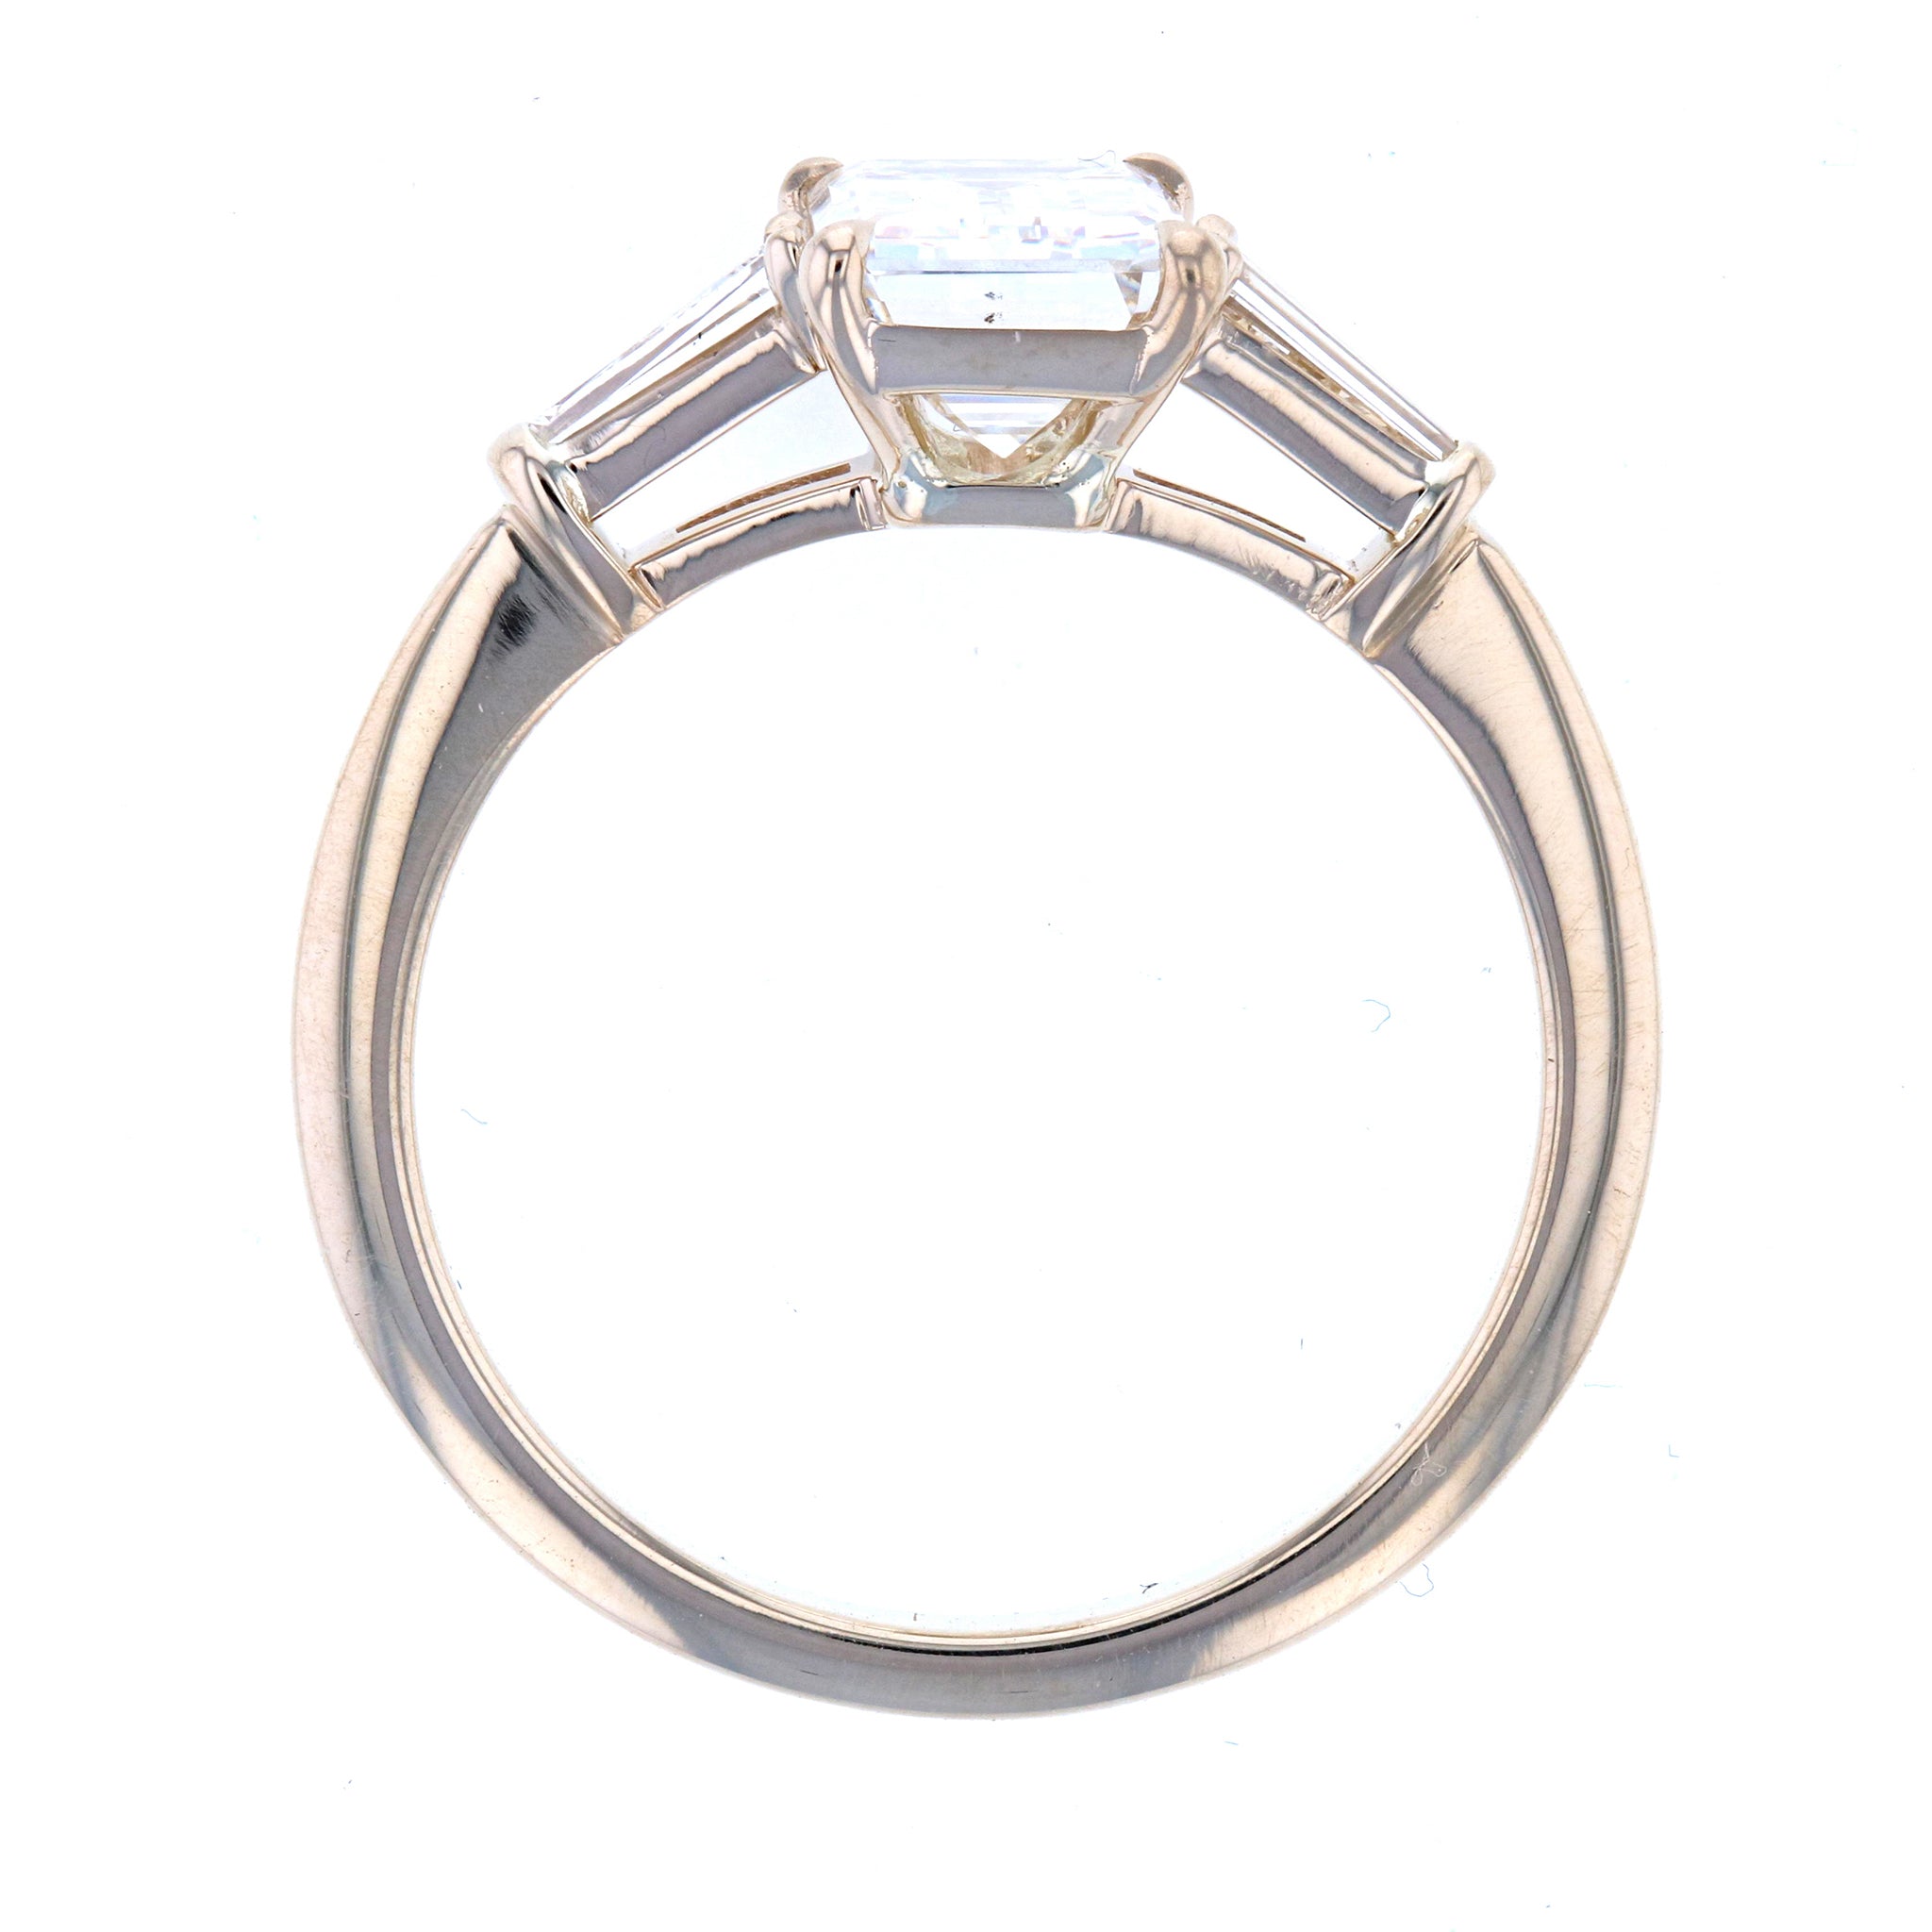 Emerald Cut Diamond Engagement Ring in Three Stone Setting with Tapered Baguettes